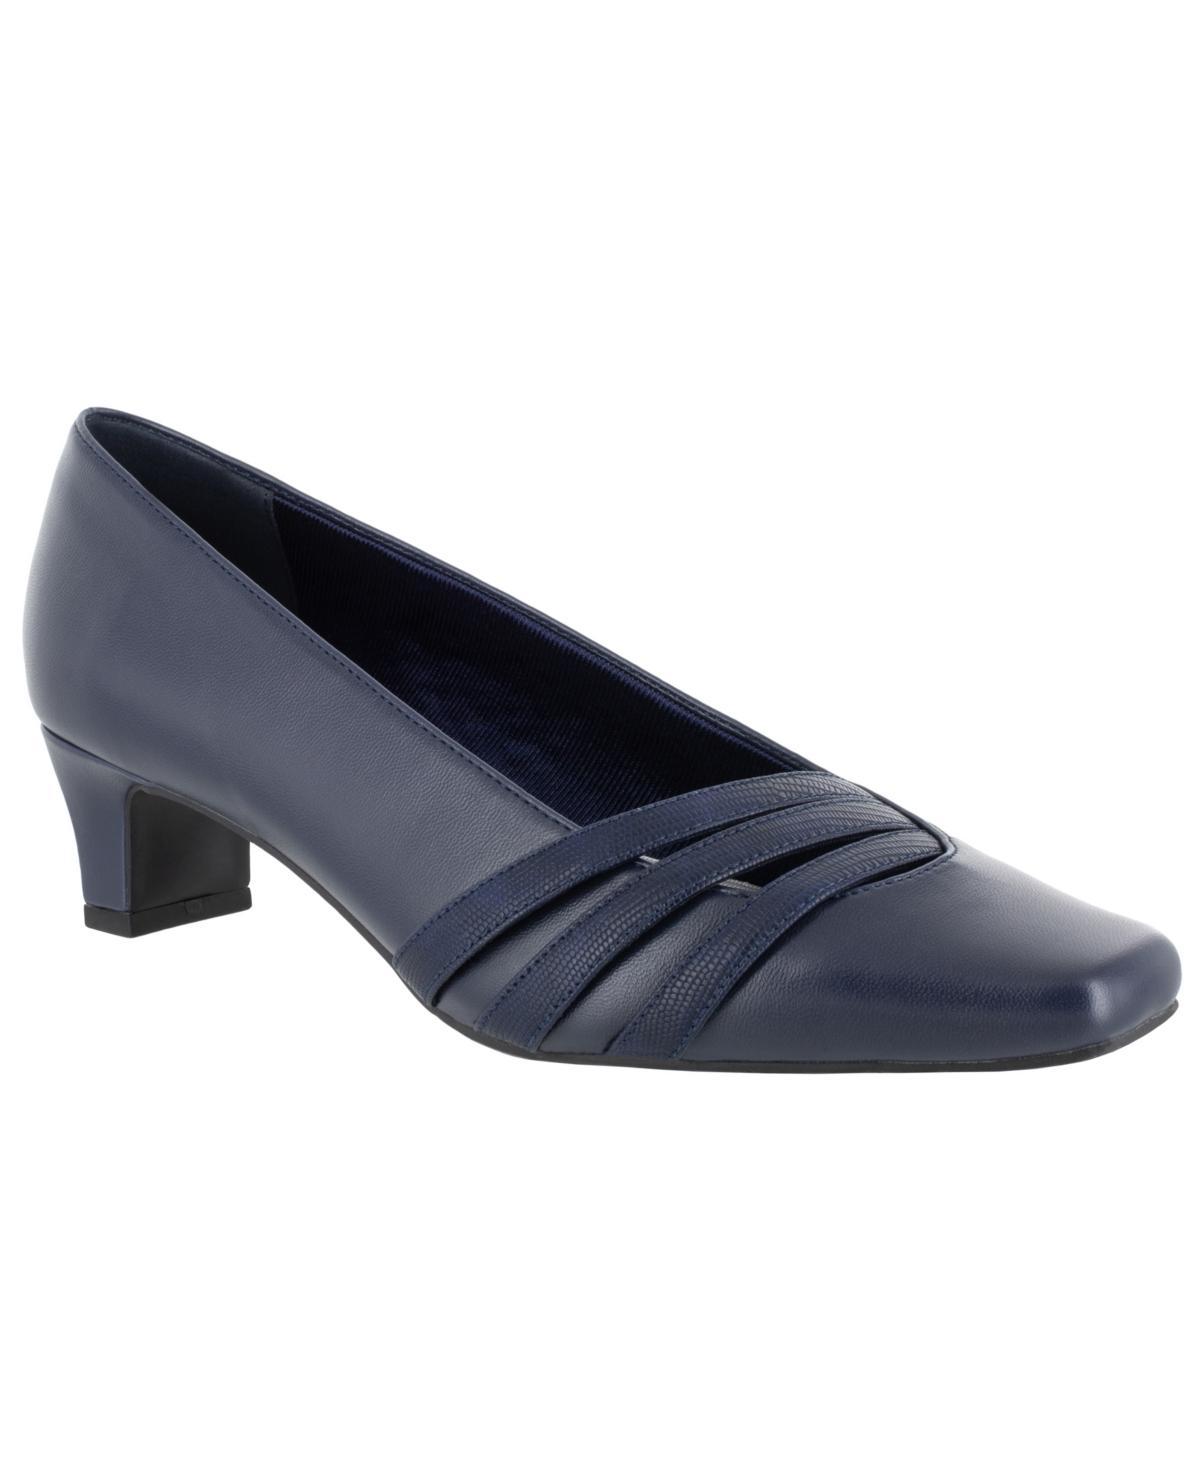 Easy Street Entice Lamy) Women's Shoes Product Image